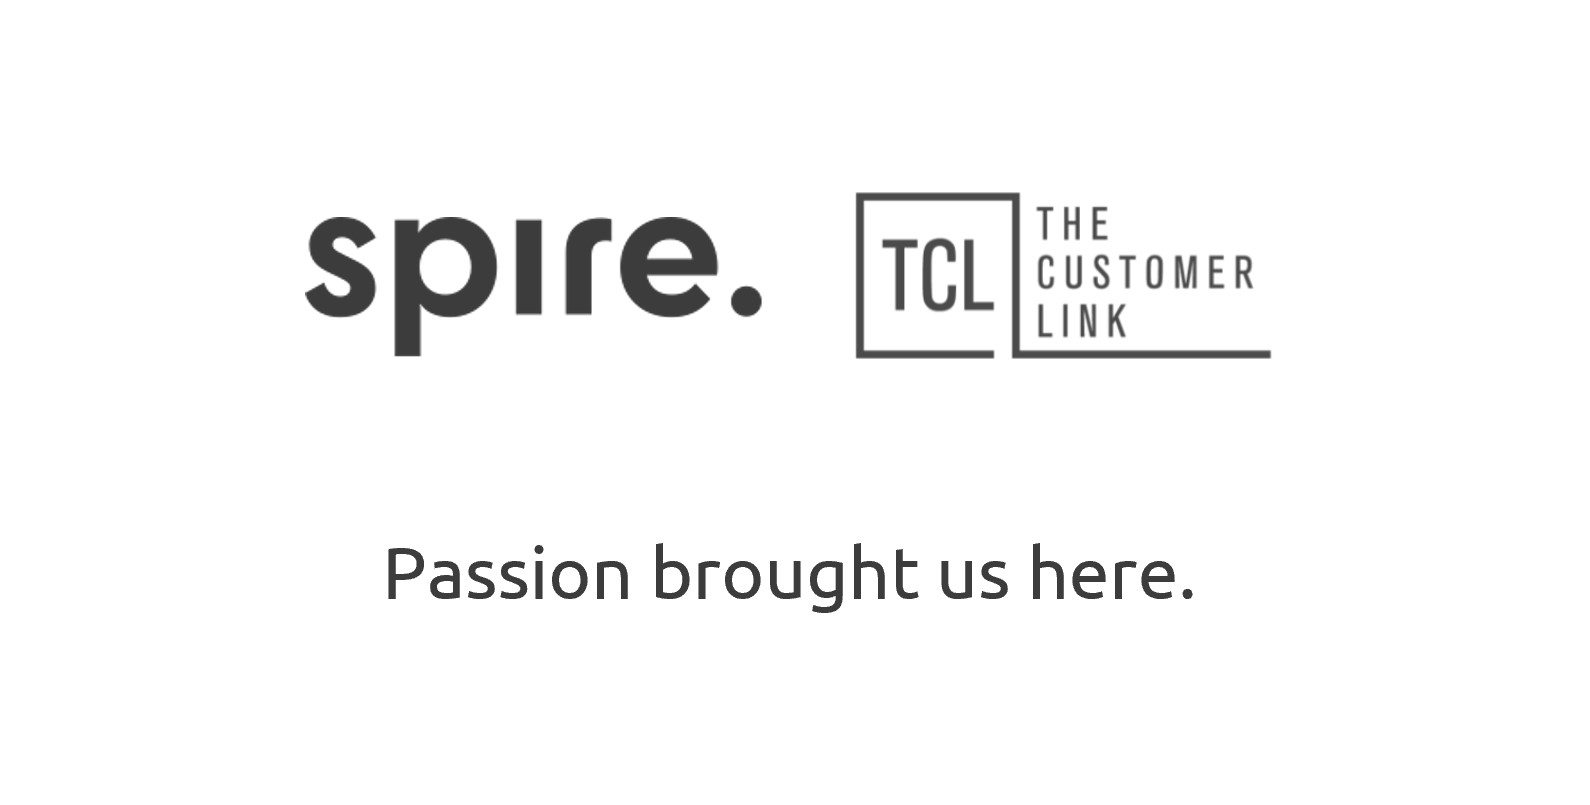 The Customer Link is a proud member of Spire